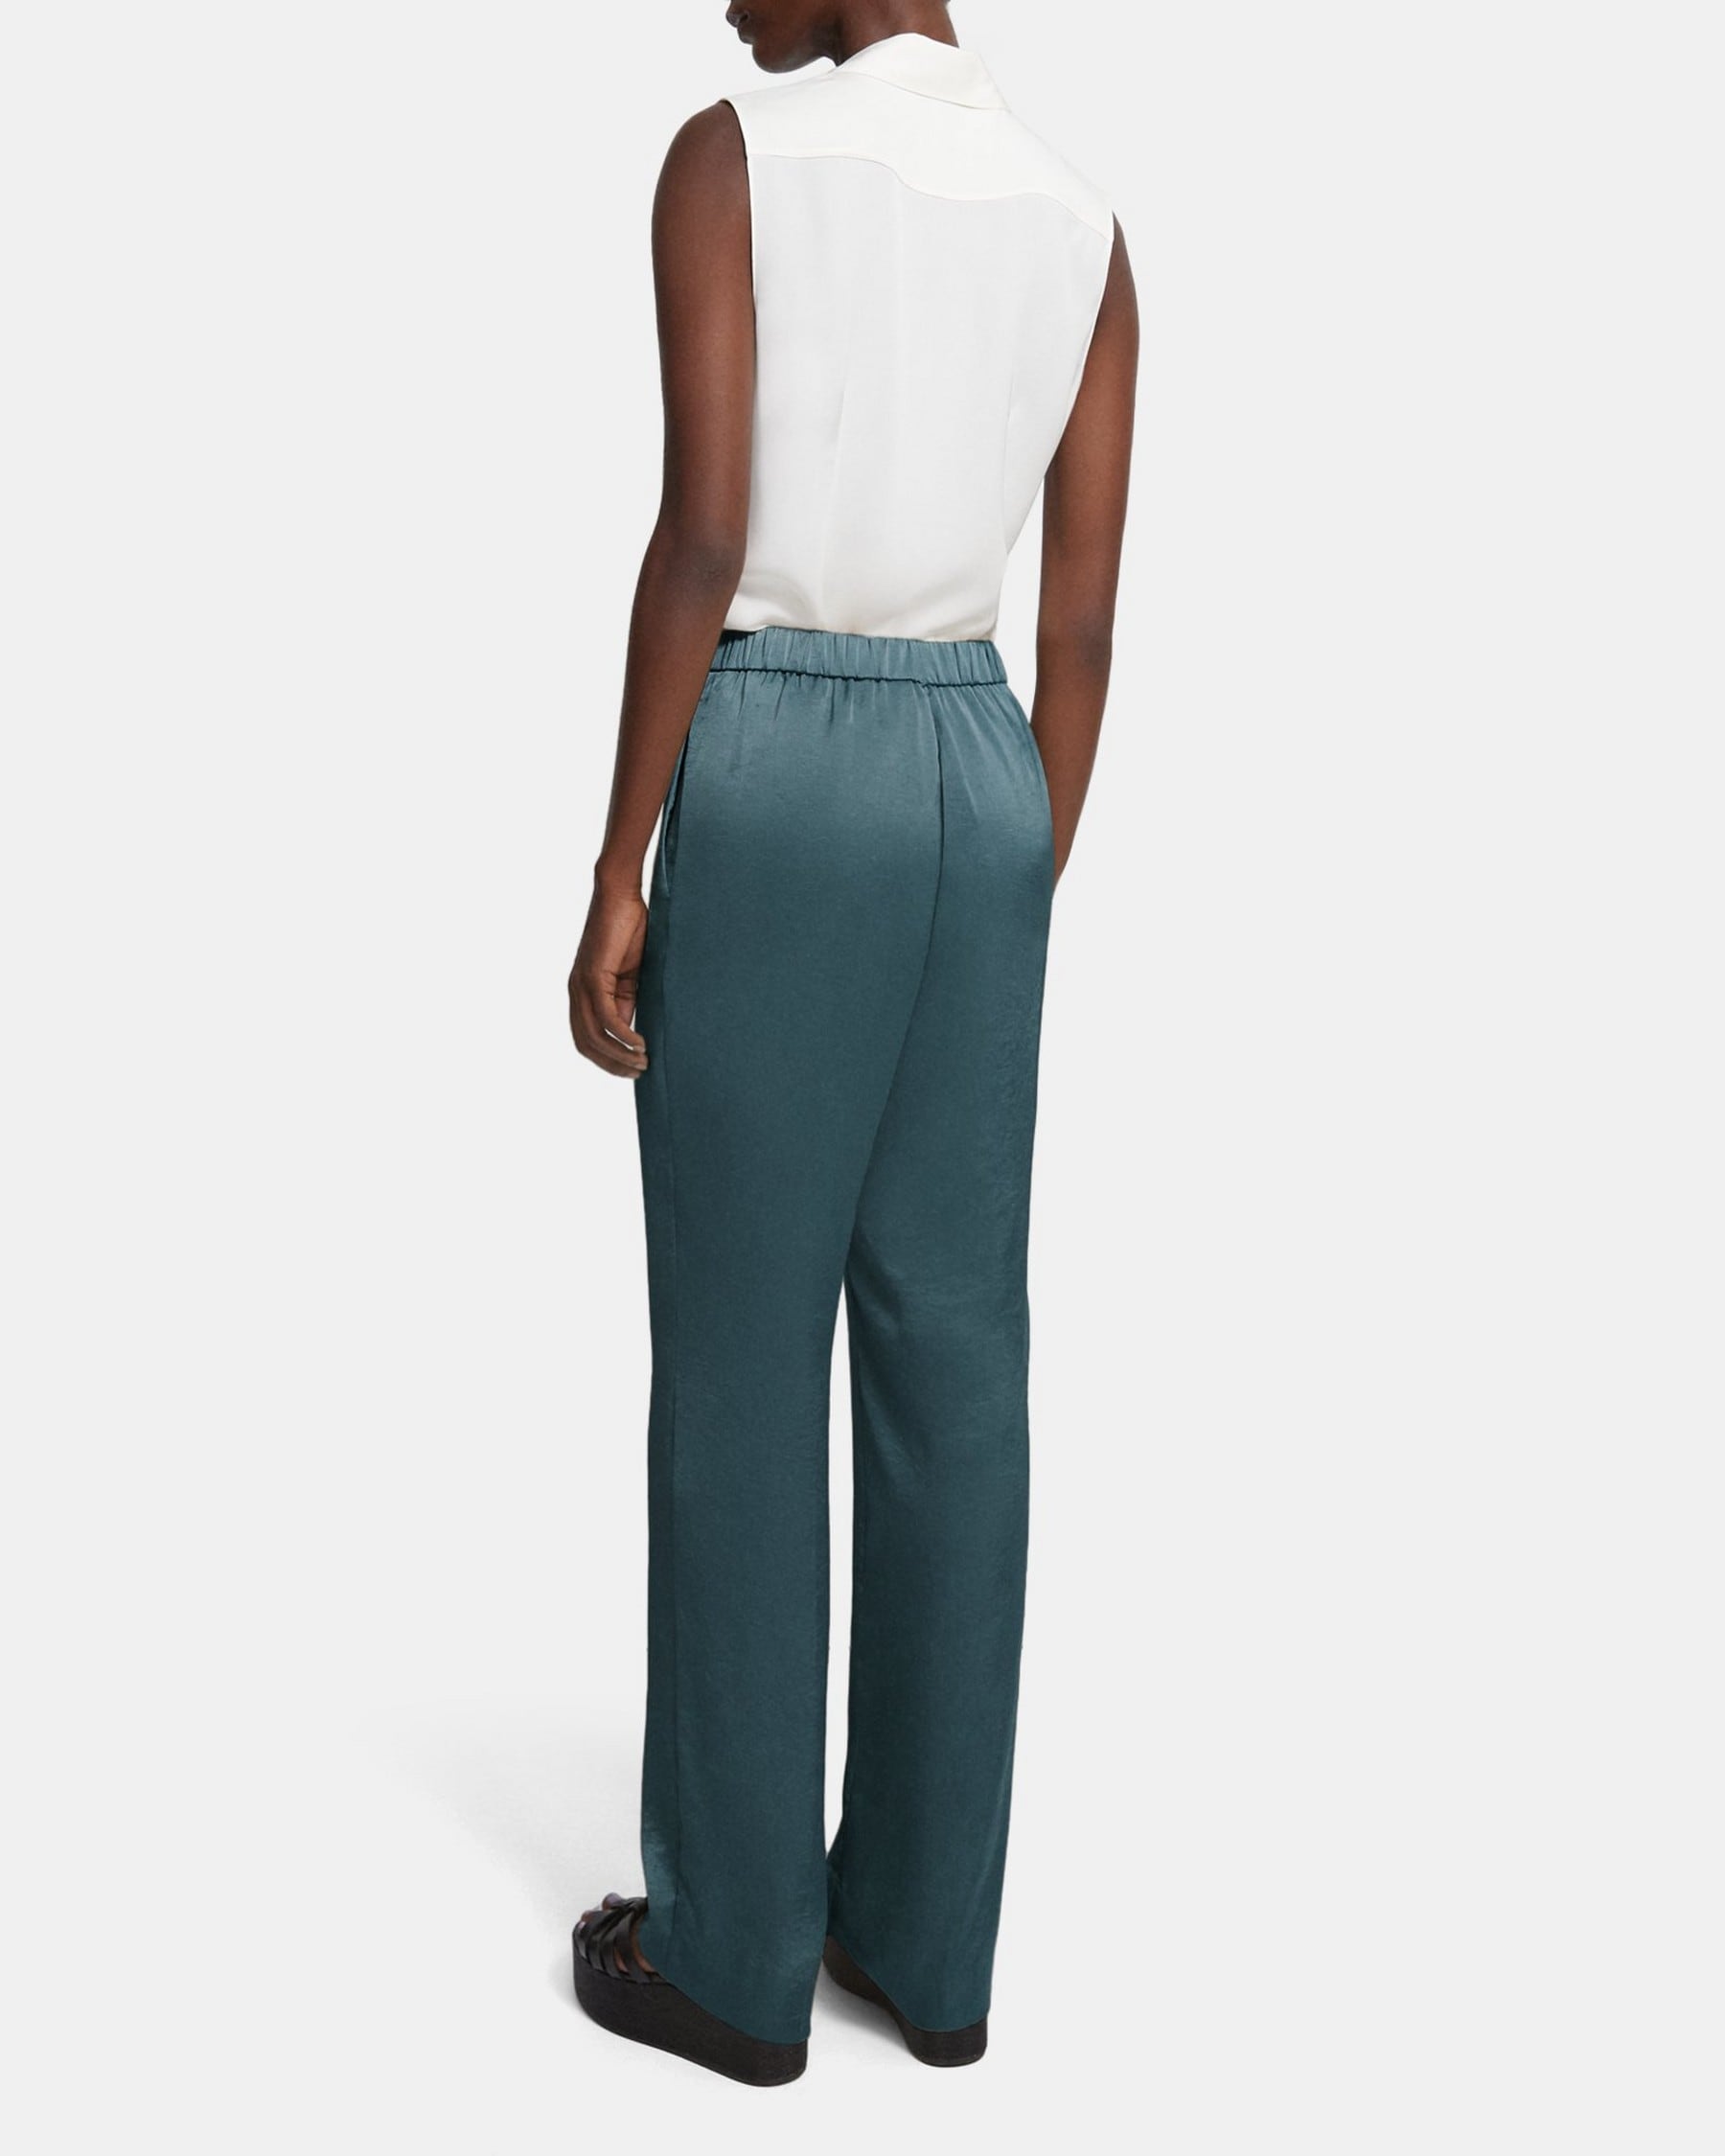 Straight Pull-On Pant in Crushed Satin